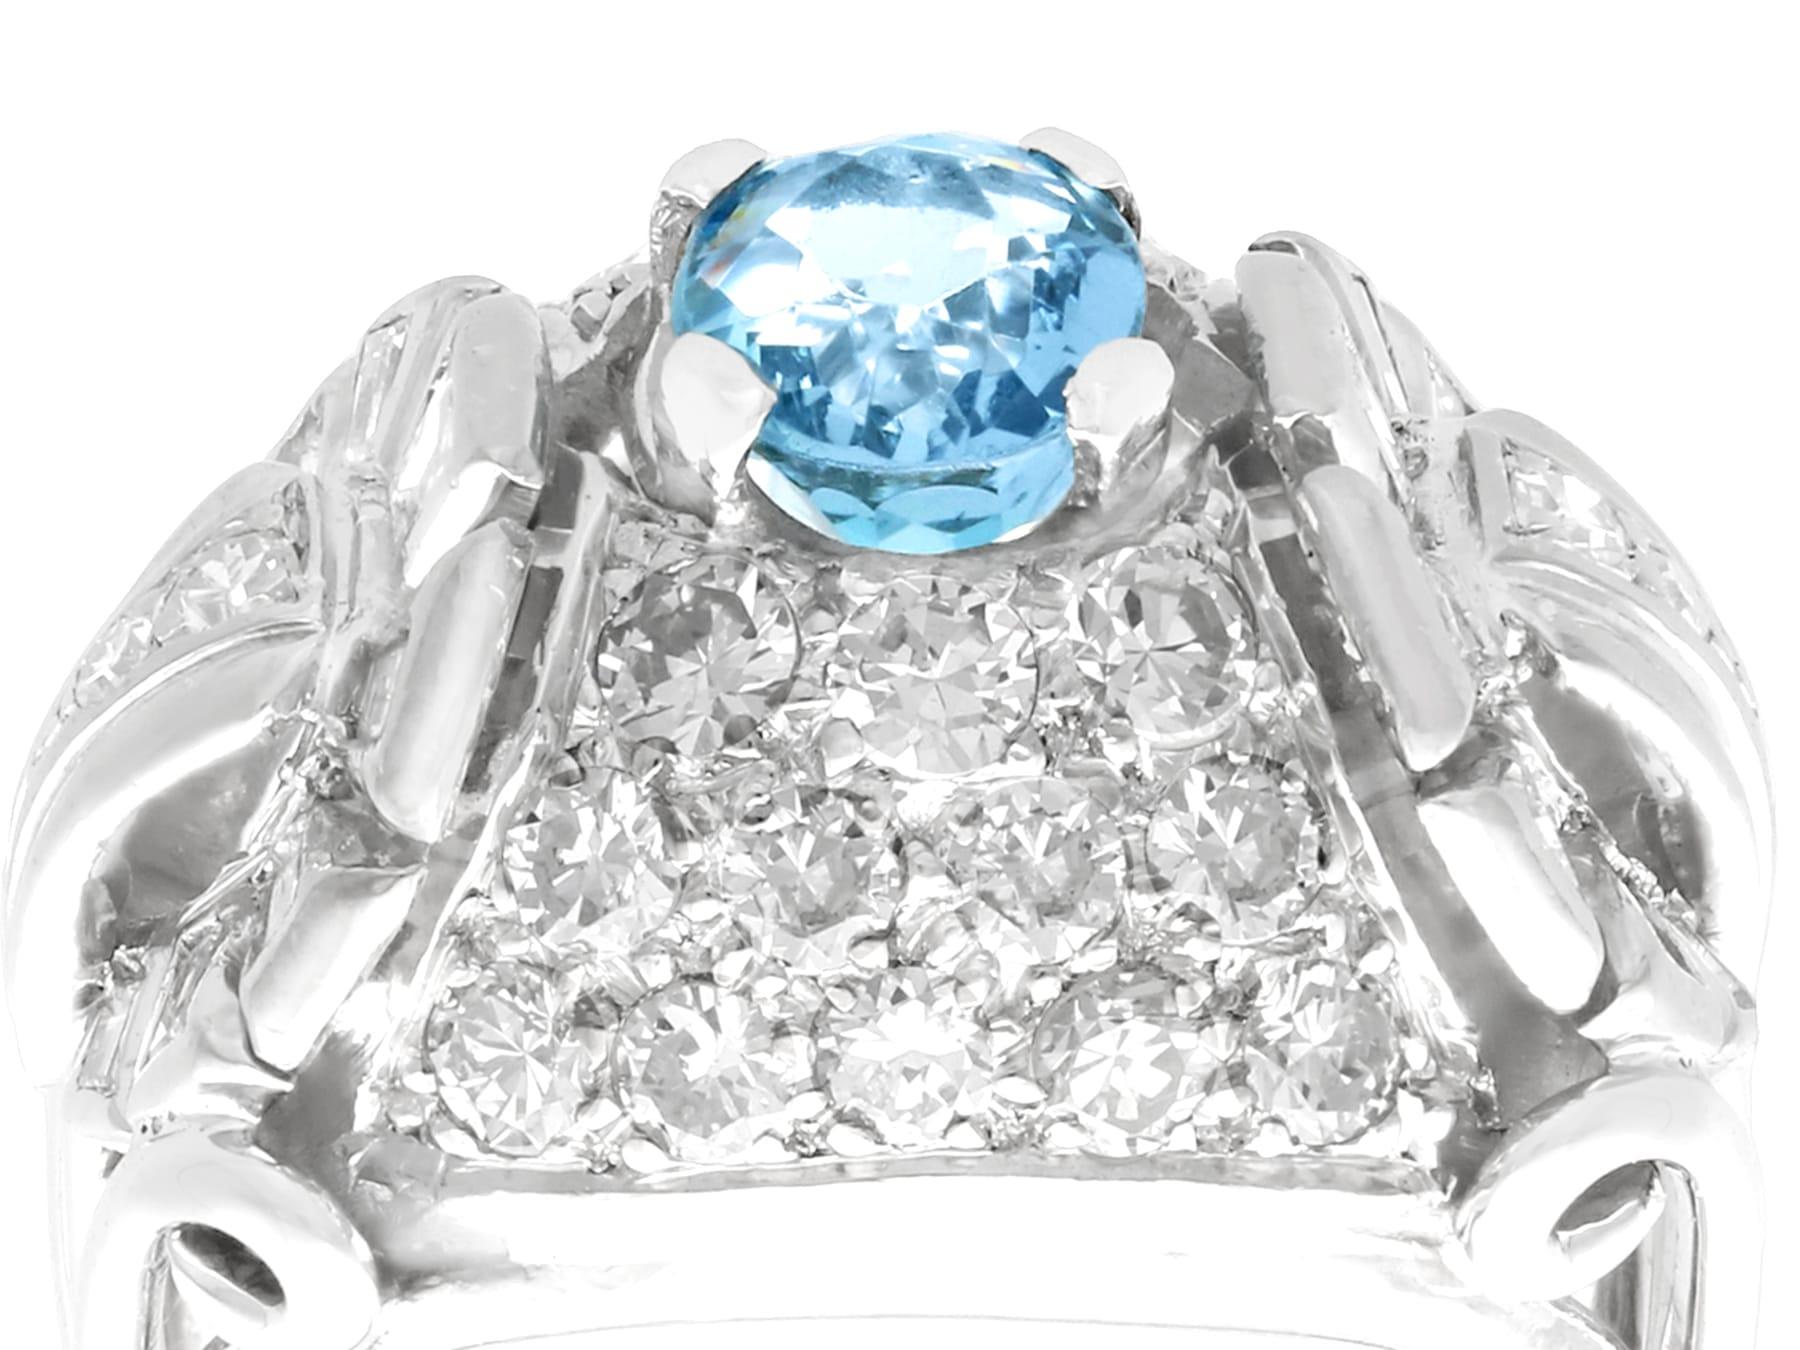 A stunning, fine and impressive vintage 0.95 carat aquamarine, 2.06 carat diamond and palladium cocktail ring; part of our diverse vintage jewelry and estate jewelry collections.

This stunning, fine and impressive vintage oval cut aquamarine ring